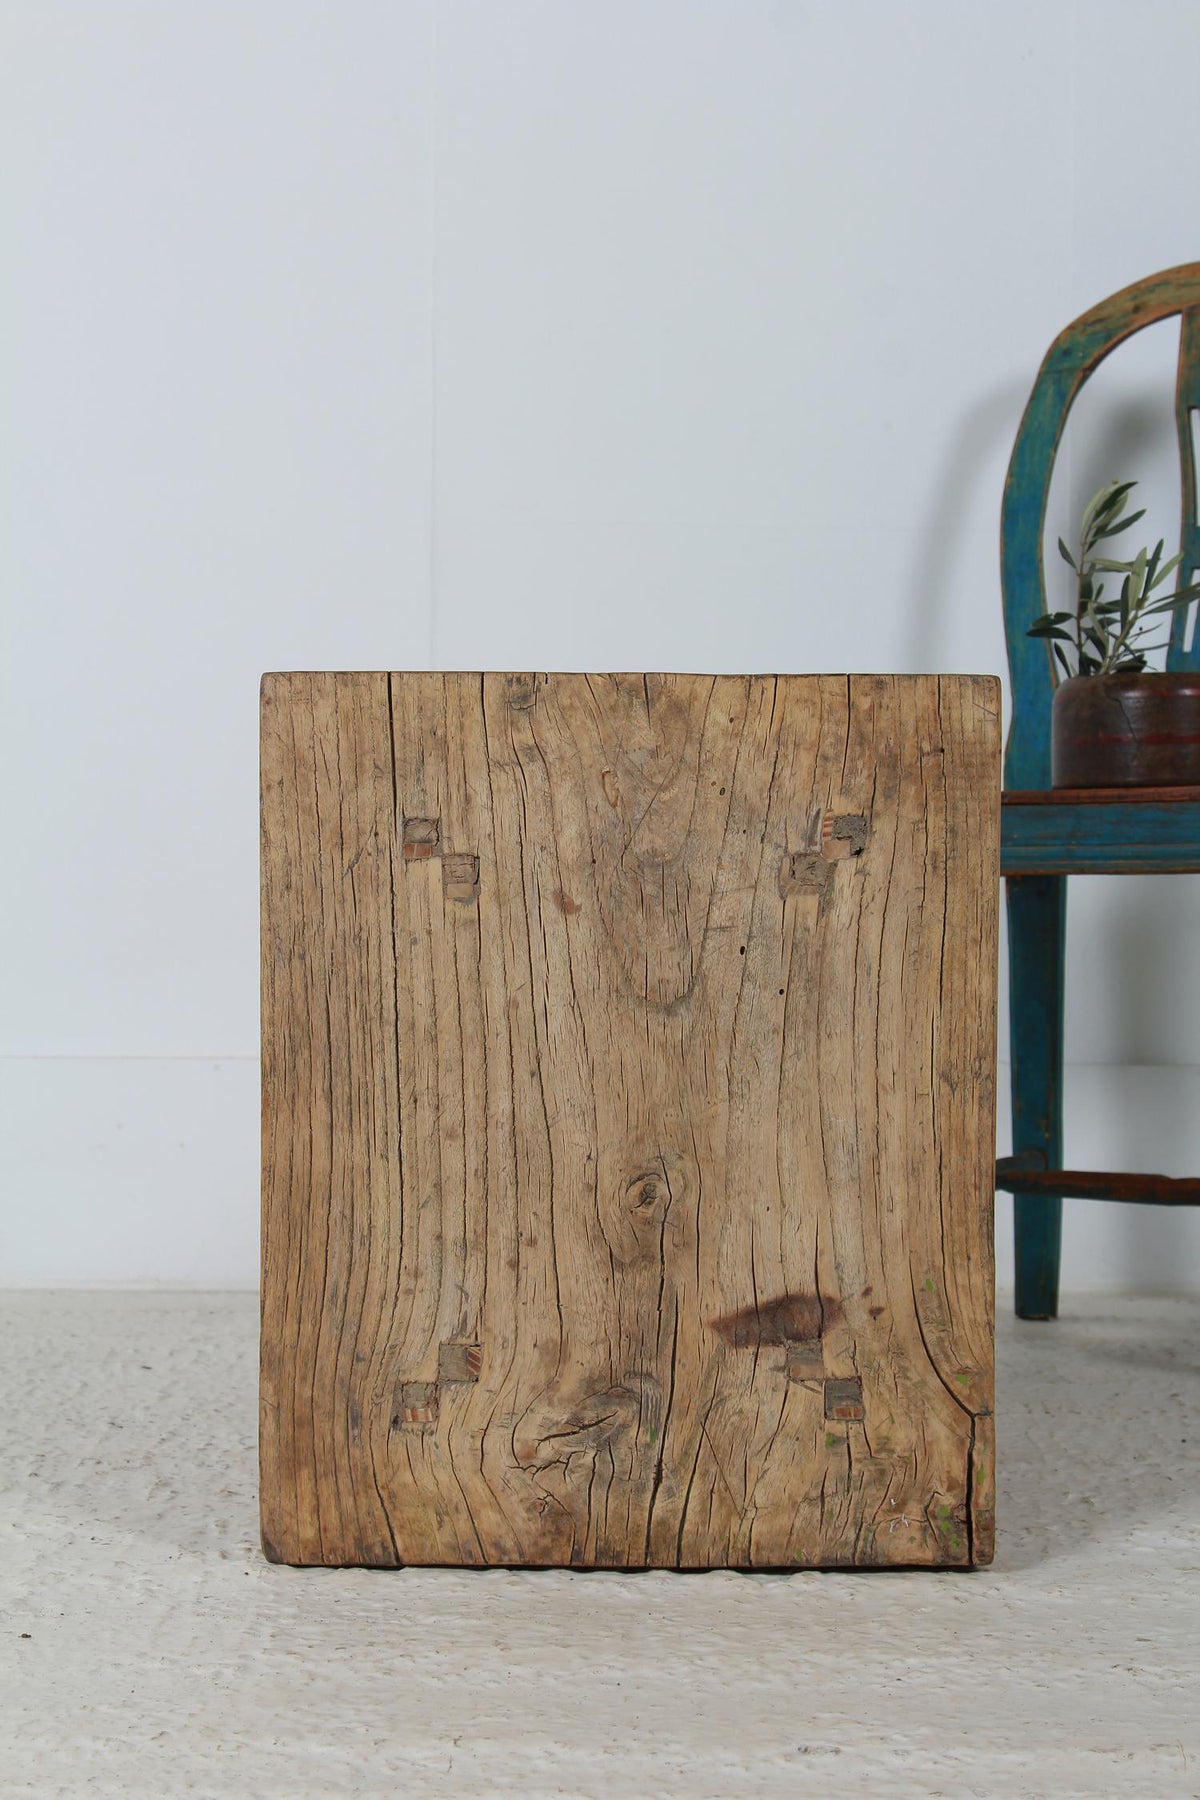 Charming Rustic Antique Elm Table Coffee /Side Table